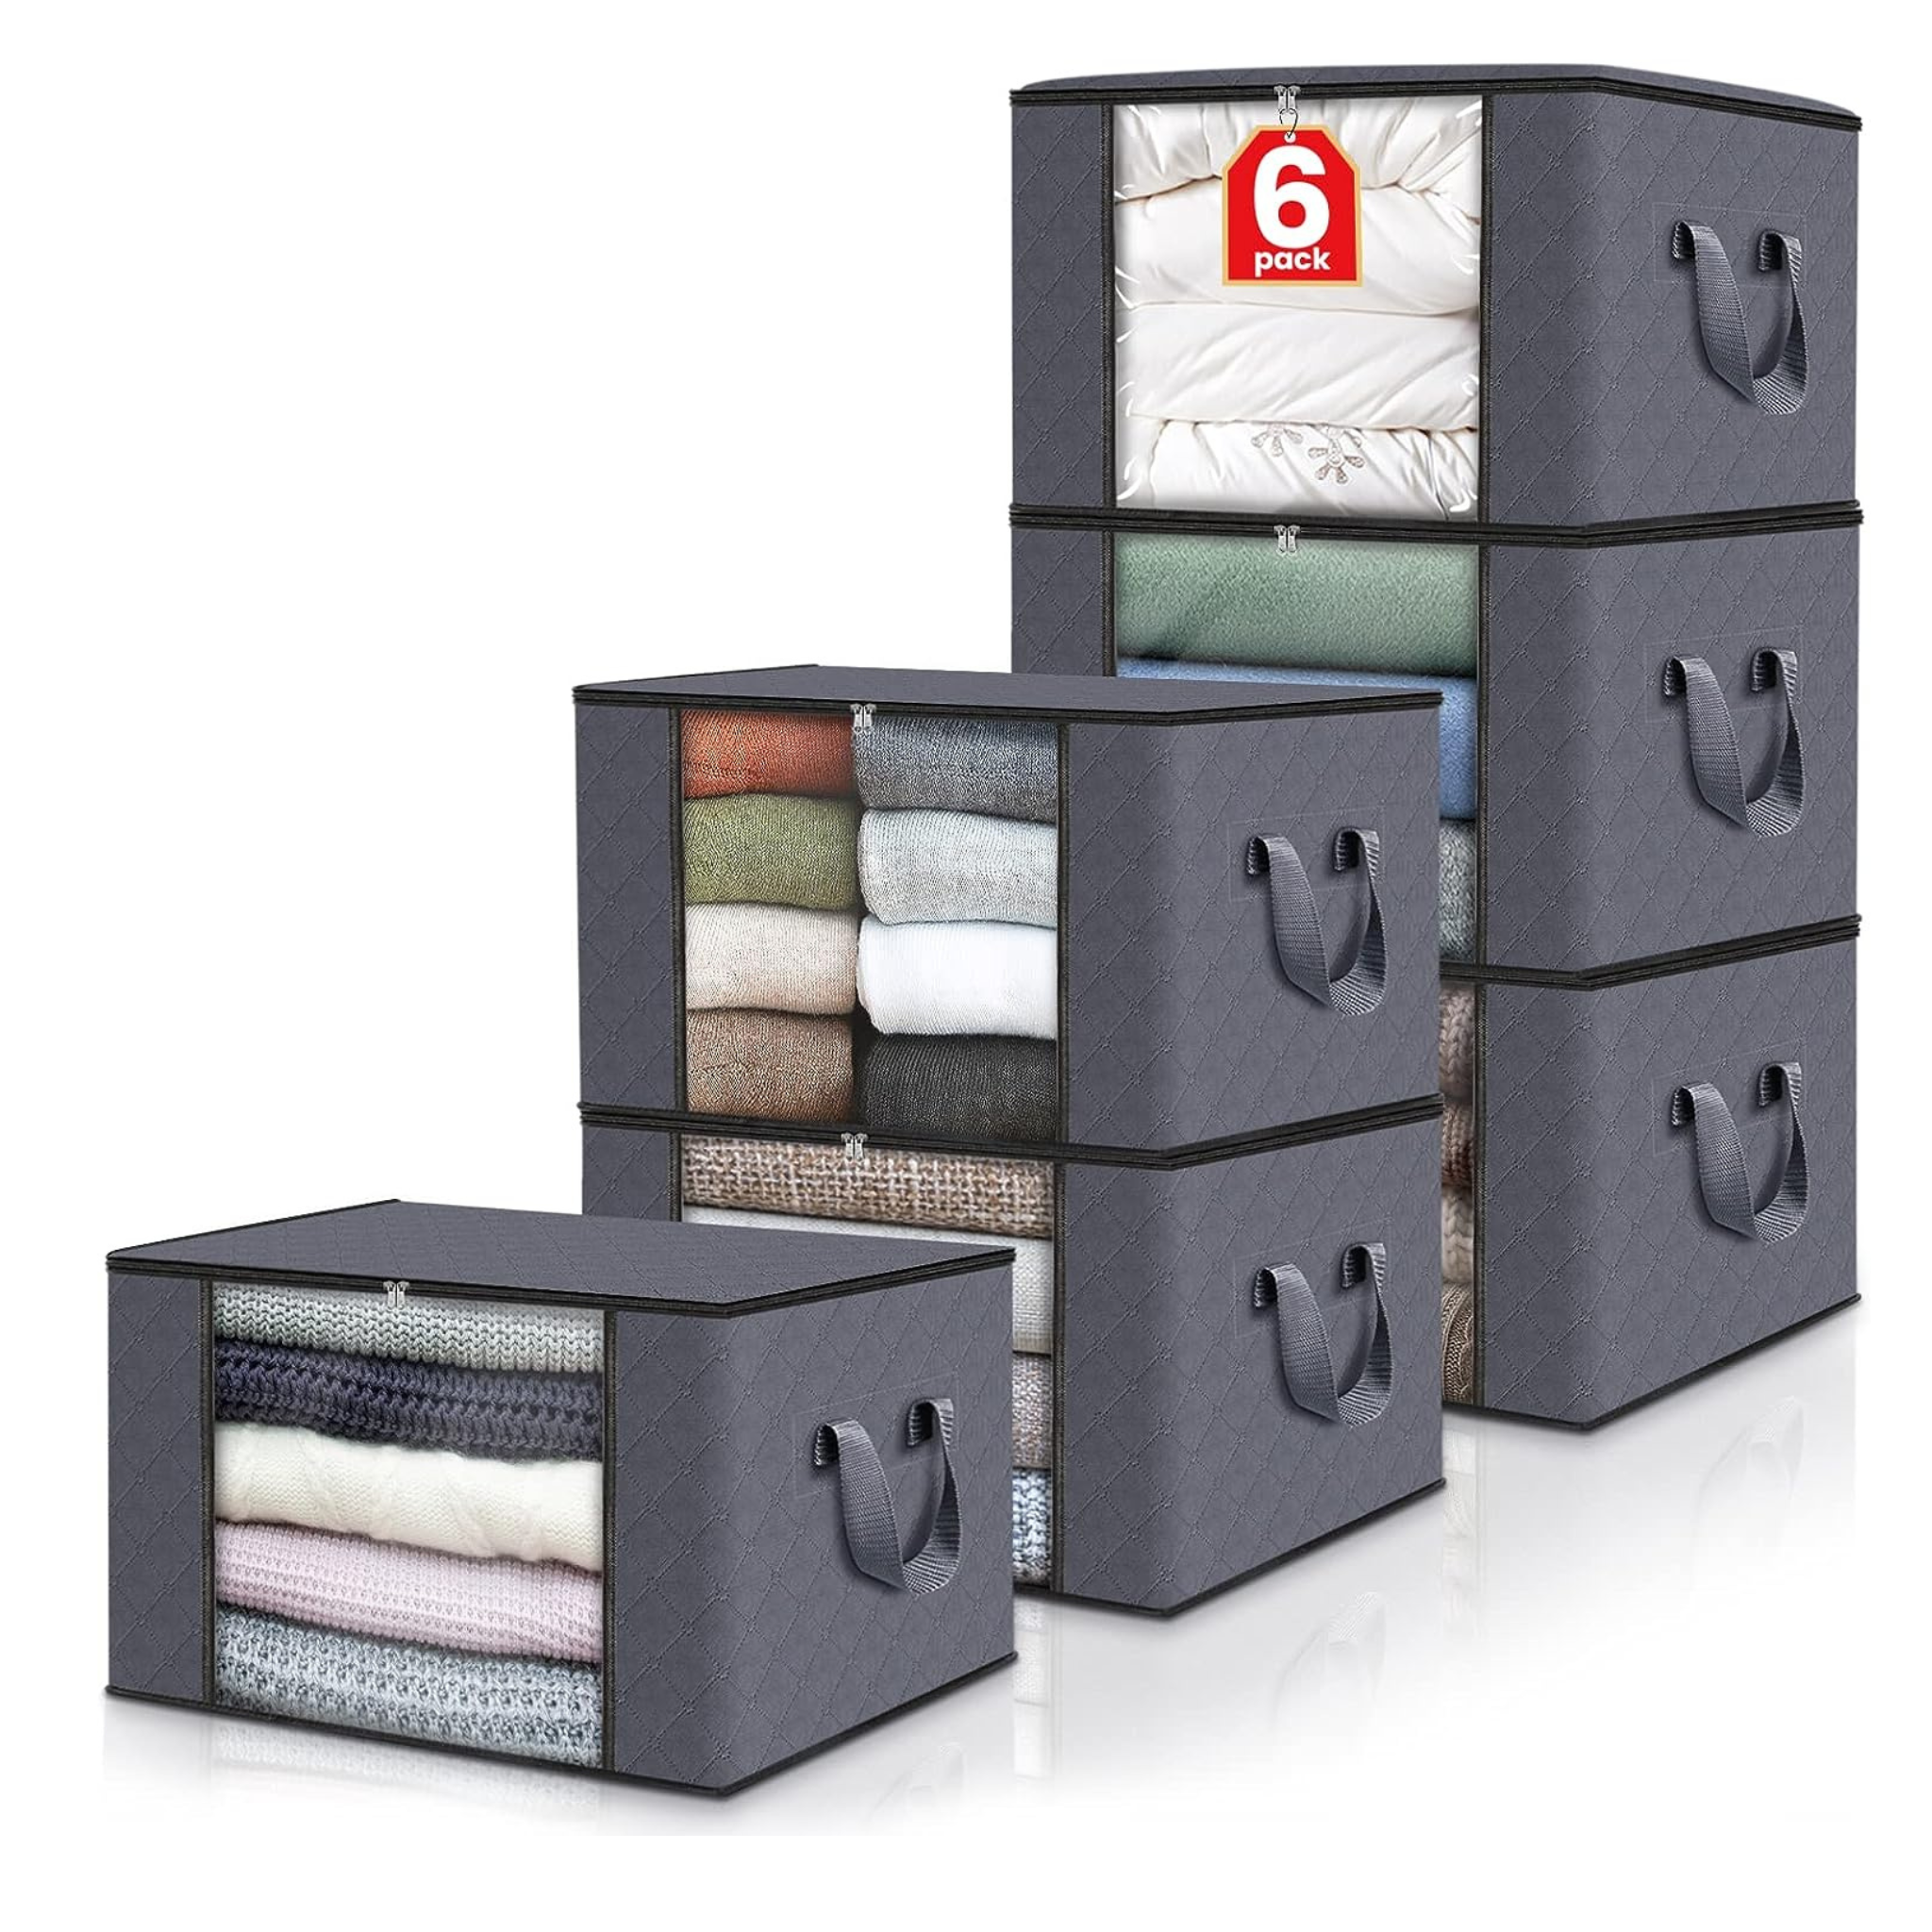 Fab totes 6 Pack Clothes Storage Containers with Lids and Handle Grey